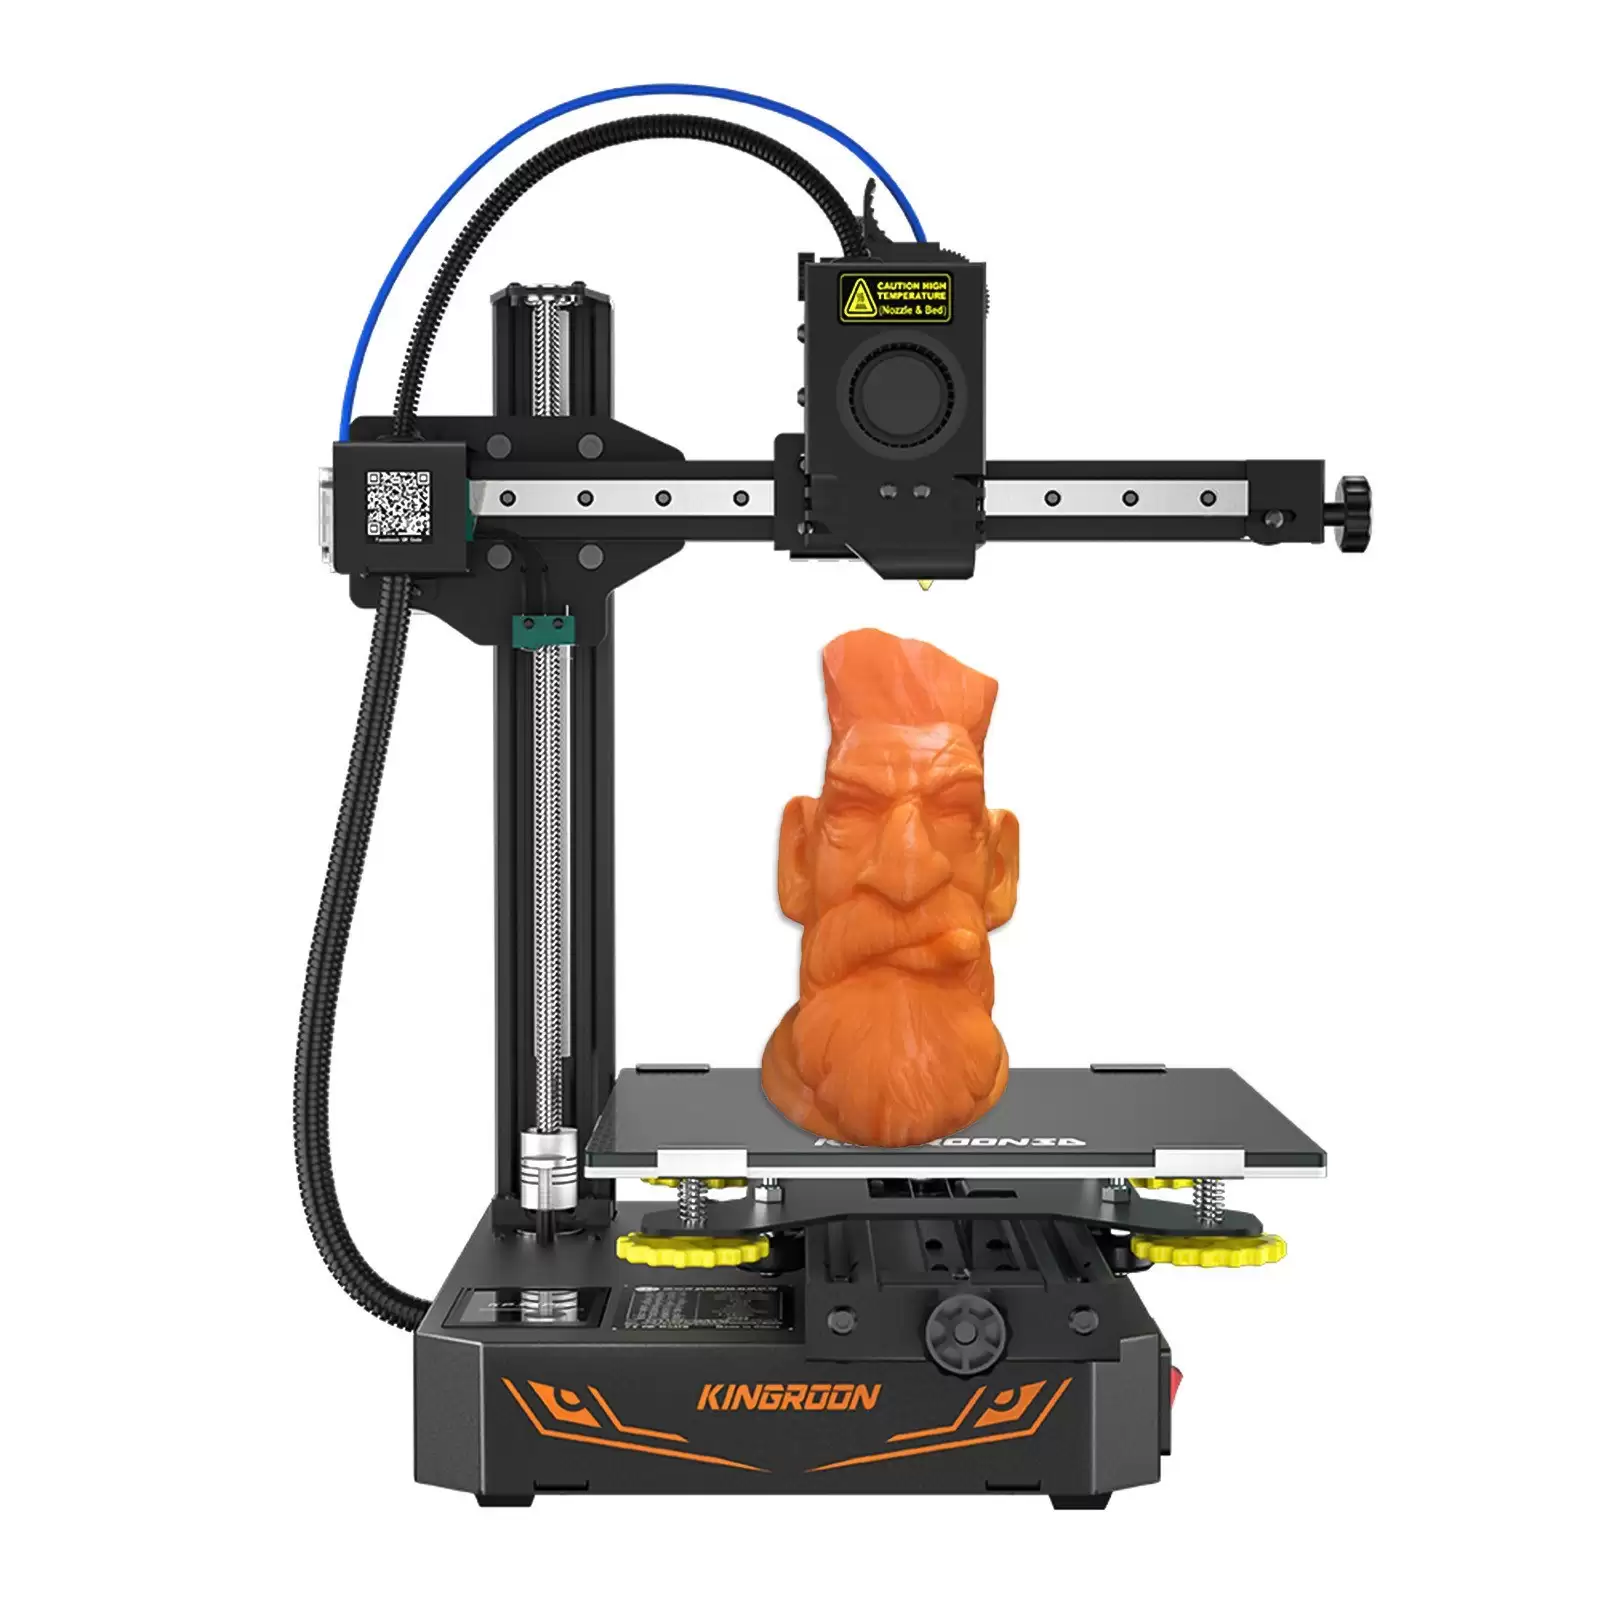 Pay $161.82 For Kingroon Kp3s Pro 3d Printer ,Free Shipping With This Cafago Discount Voucher